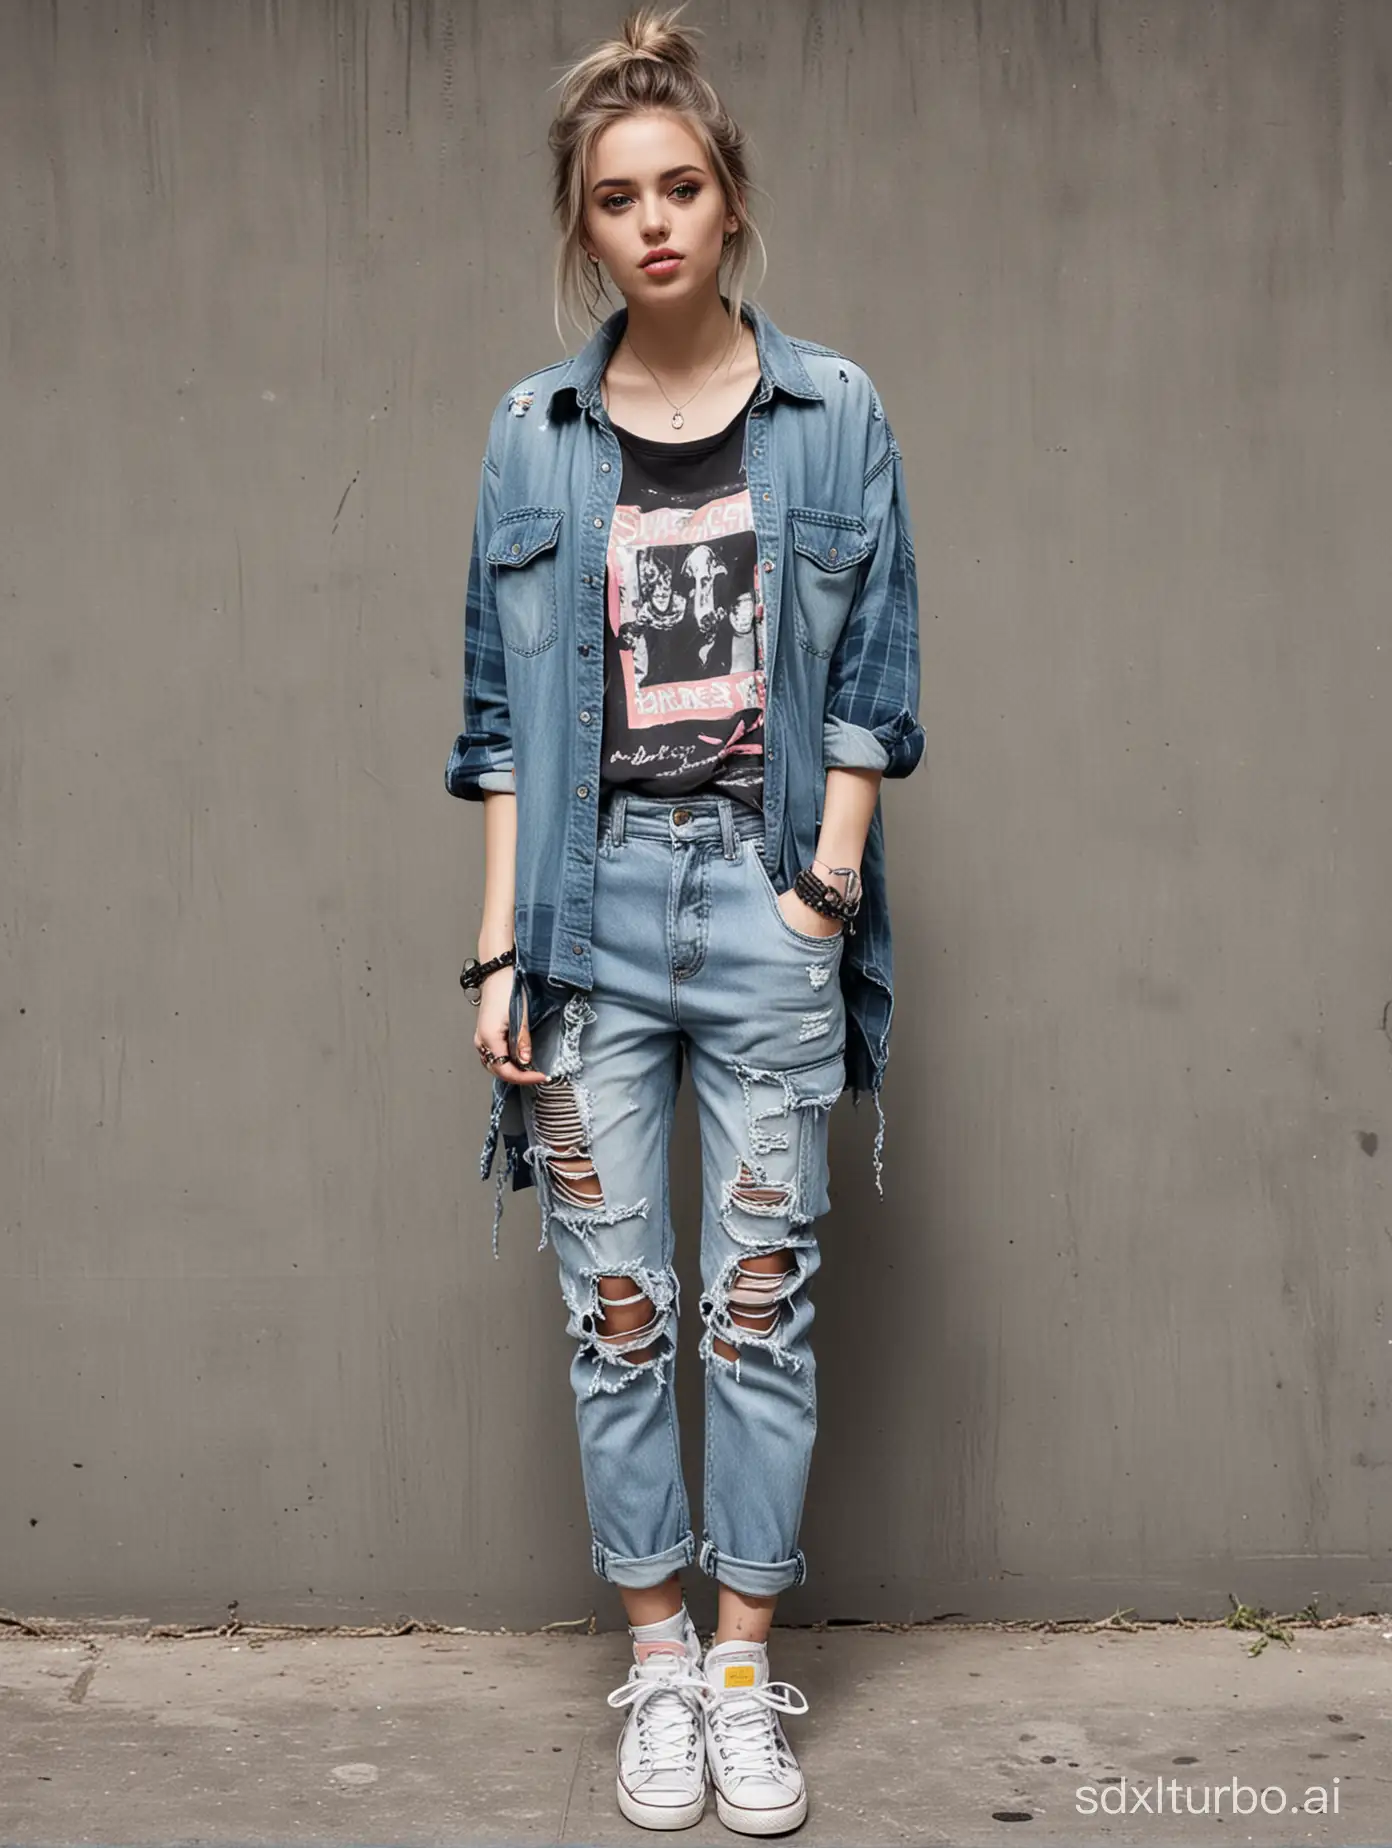 Girl portrait, styled by Pajaritito490. Line and ink color painting, 1 girl, solo, grunge fashion, distressed jean, oversized ripped flannel shirt layered over graphic band tee, cargo pants, worn-out sneakers paired with neon accent accessories, grey eyes, pale skin, look at viewer,